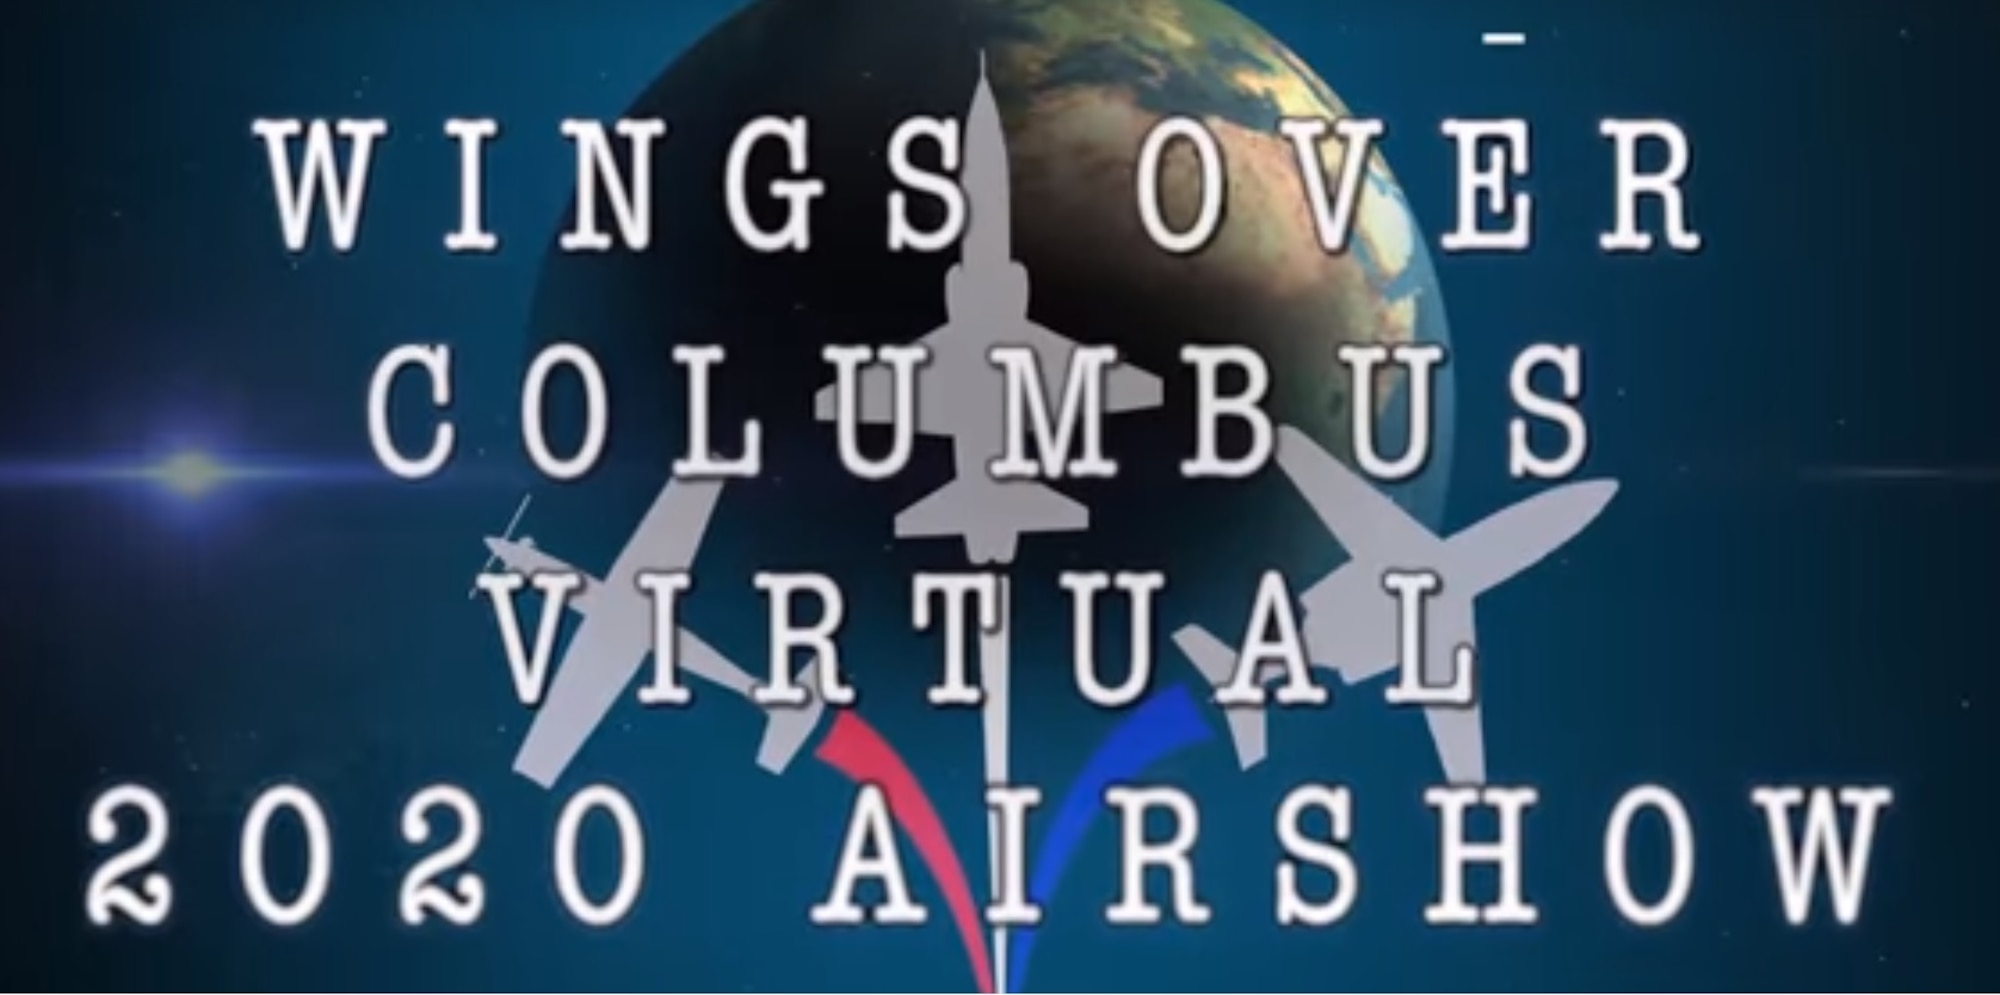 Columbus Air Force Base featured a virtual air show, 2020 Wings Over Columbus, on their Facebook page @ColumbusAFB April 24. This virtual air show replaced the physical air show scheduled for April 25-26 because of the COVID-19 pandemic. Through the virtual air show Columbus AFB connected with their community and allowed the public to see the world’s greatest military aviators from a different perspective. (U.S. Air Force graphic by 14th Flying Training Wing Public Affairs)